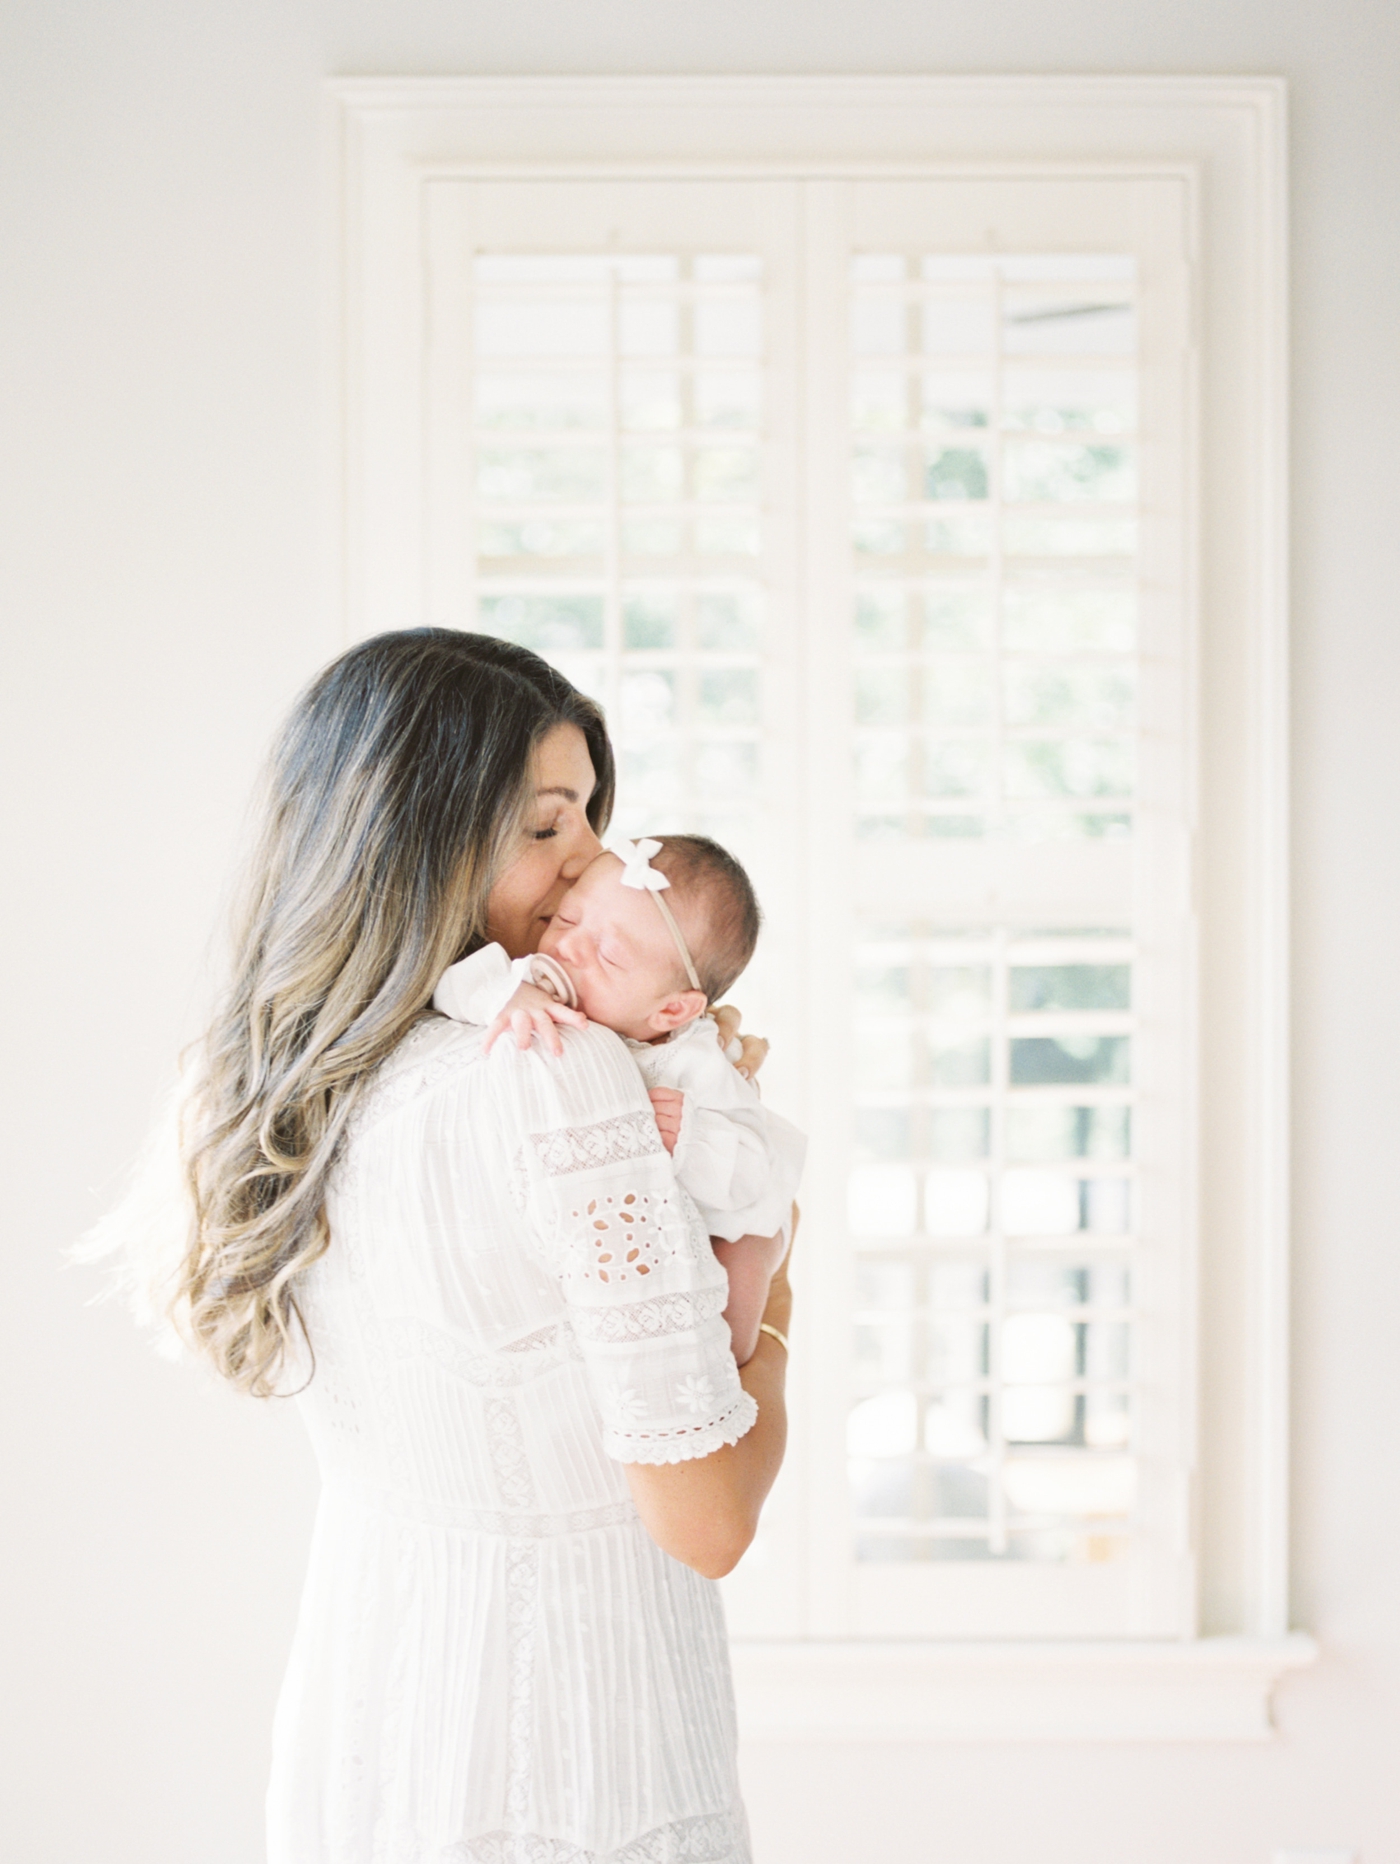 Newborn session image on film of Mom kissing baby girl. Photo by Caitlyn Motycka Photography.